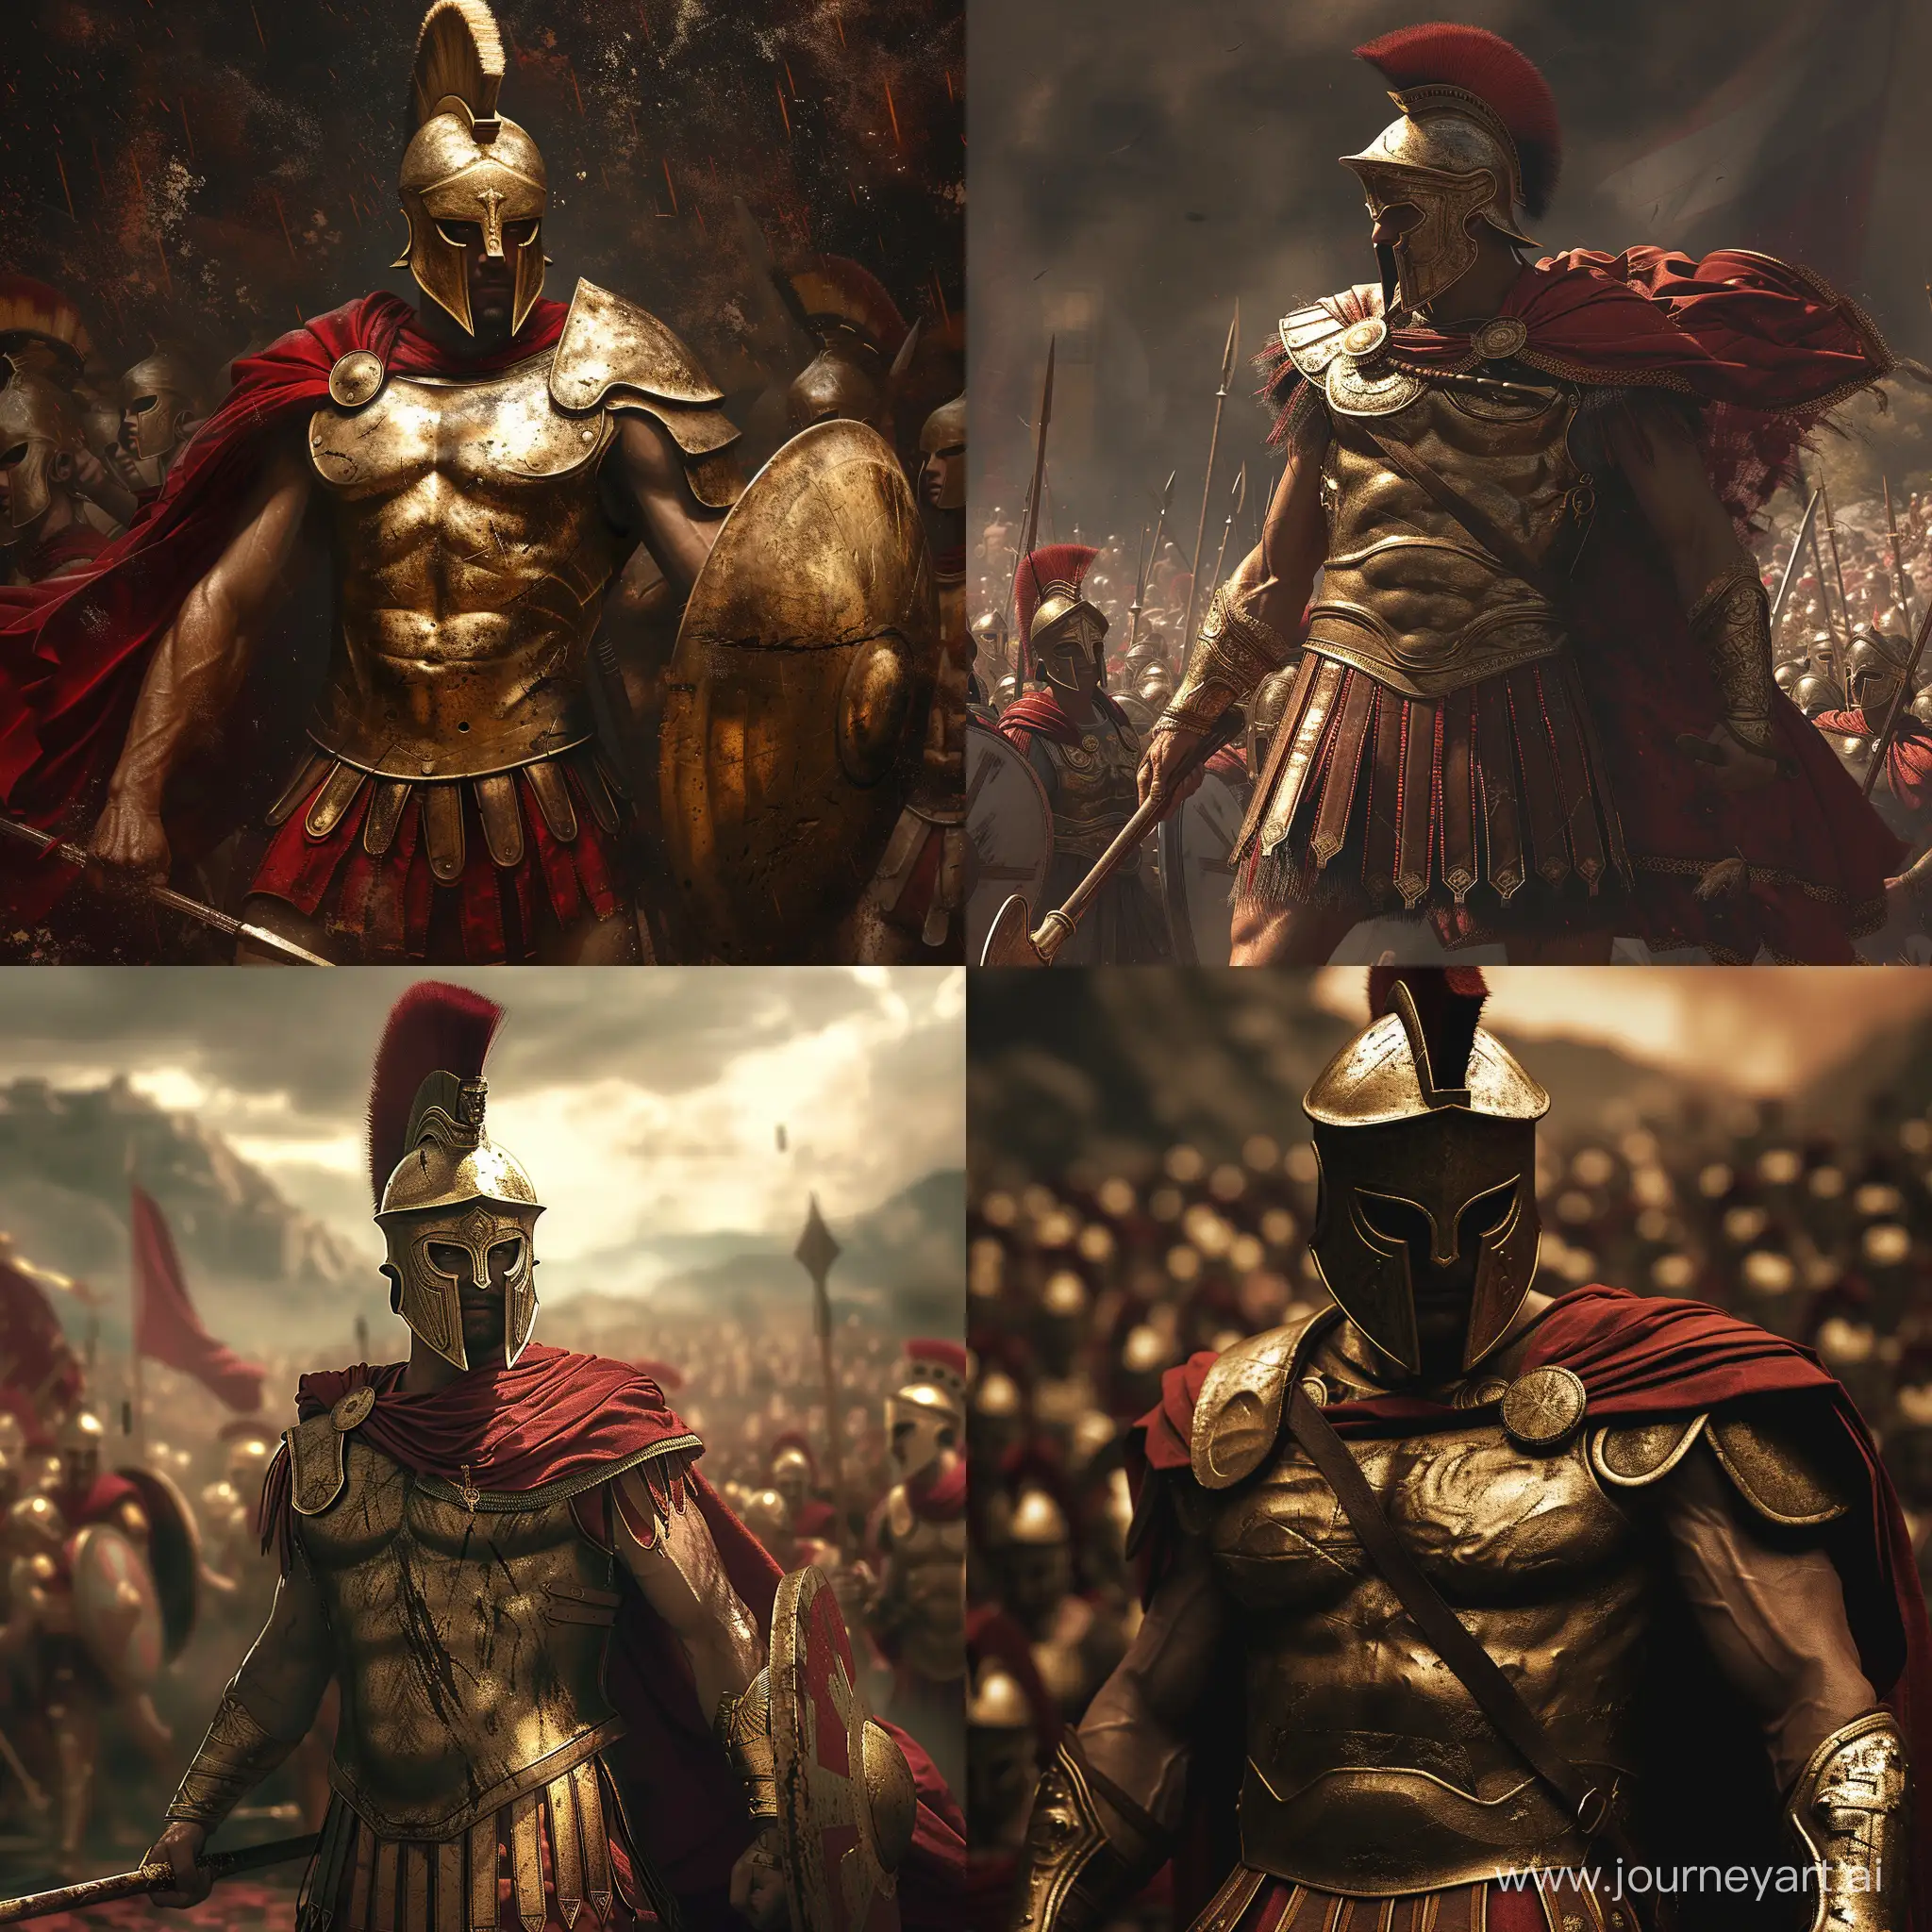 a spartan warrior, in the style of dark crimson and gold, academic classicism, 32k uhd, spectacular backdrops, bronze playfulness, associated press photo, detailed crowd scenes  stylize 